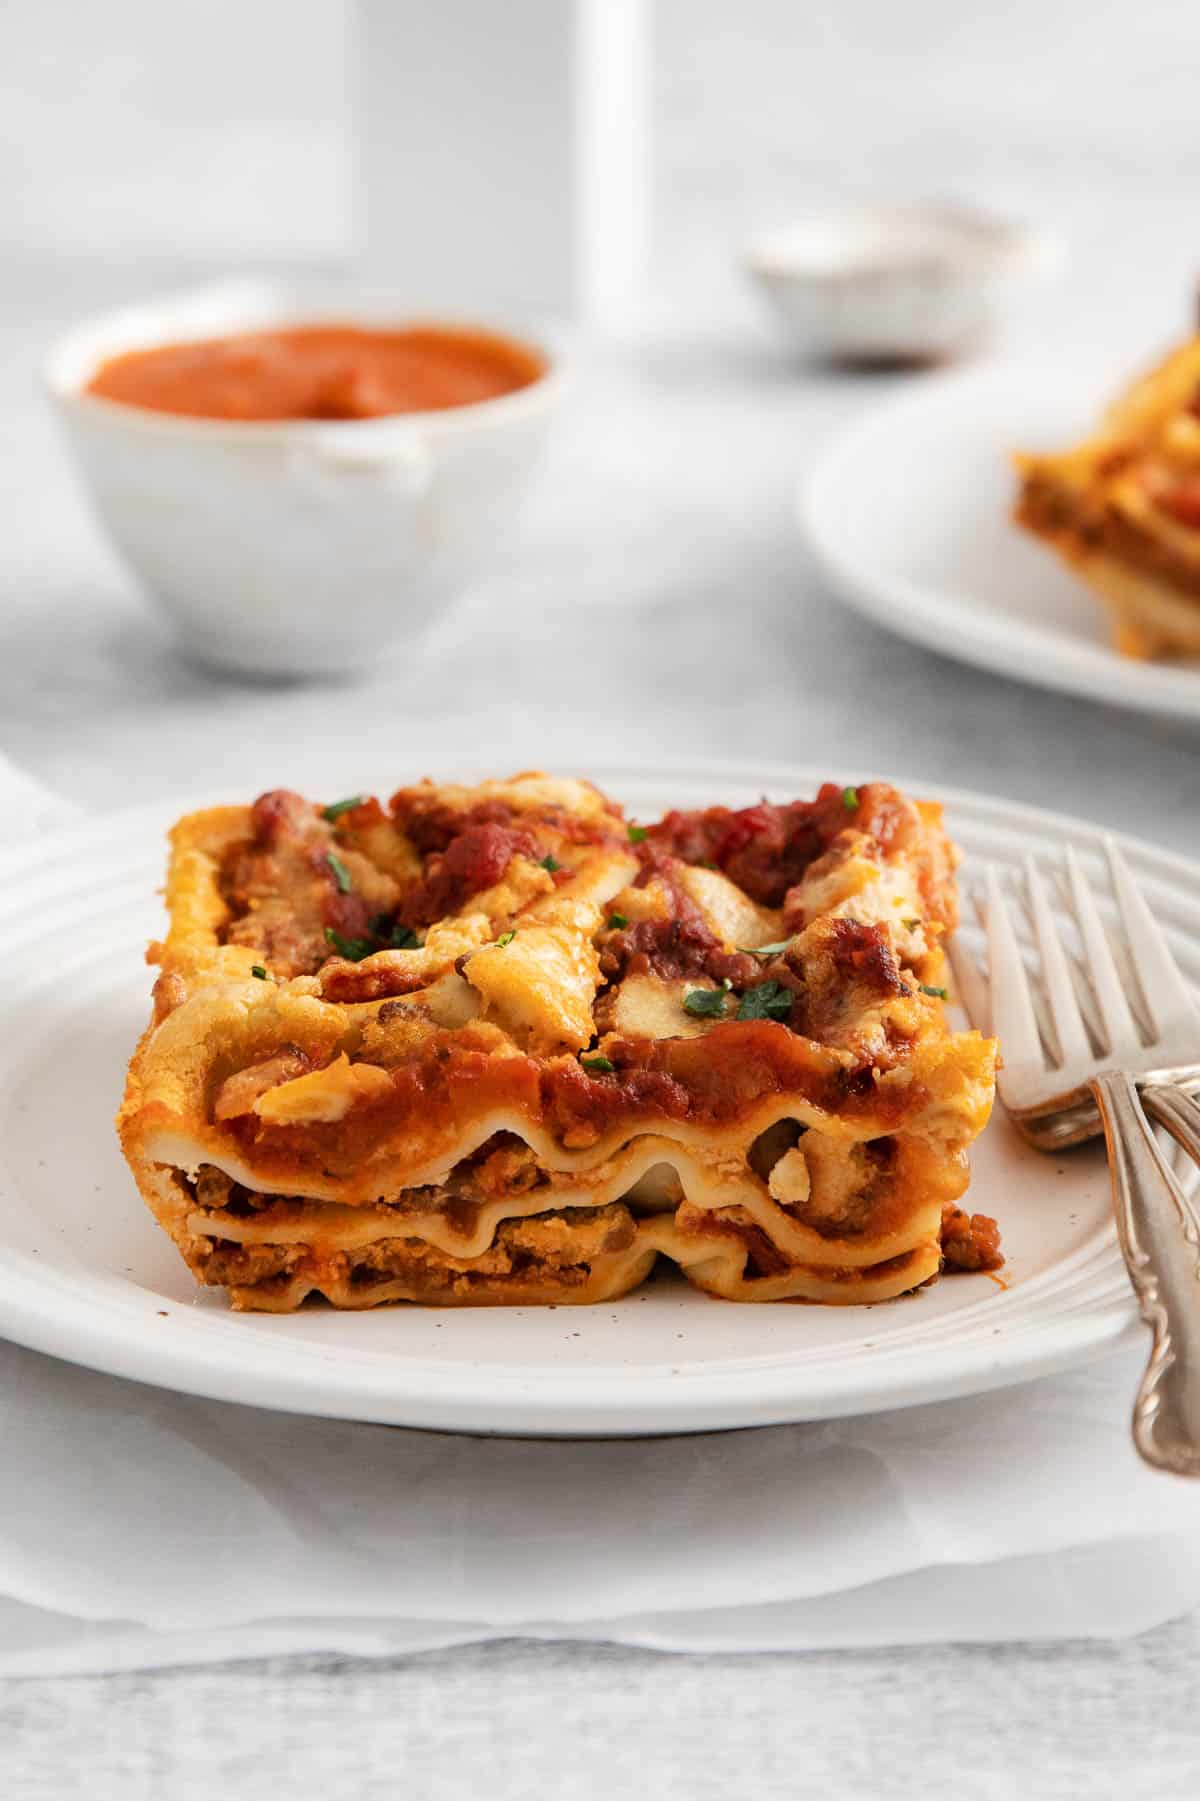 A slice of dairy-free lasagna on a plate with a fork